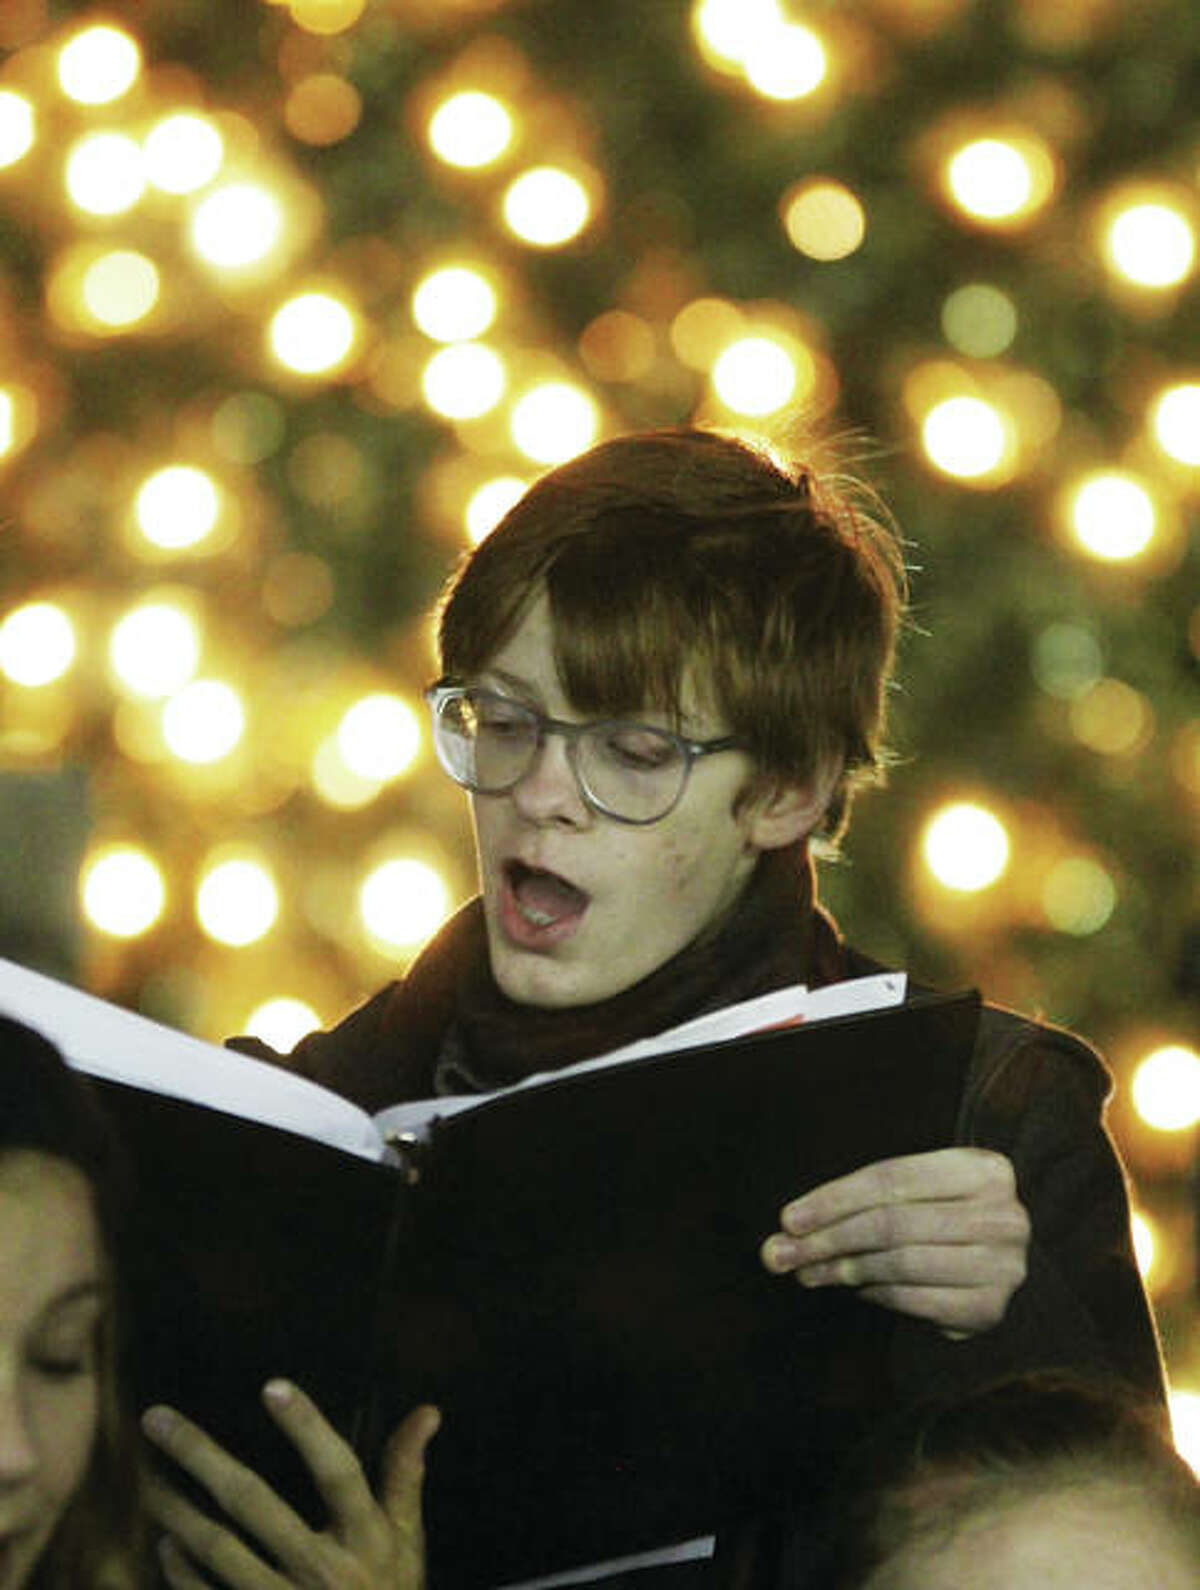 Austin Turnbull, a member of the Alton High School Chamber Singers, sings Christmas carols during the 23rd annual Christmas Tree Lighting in Lincoln-Douglas Square in downtown Alton. The ceremony drew about 250 people, and is sponsored by Alton Main Street.